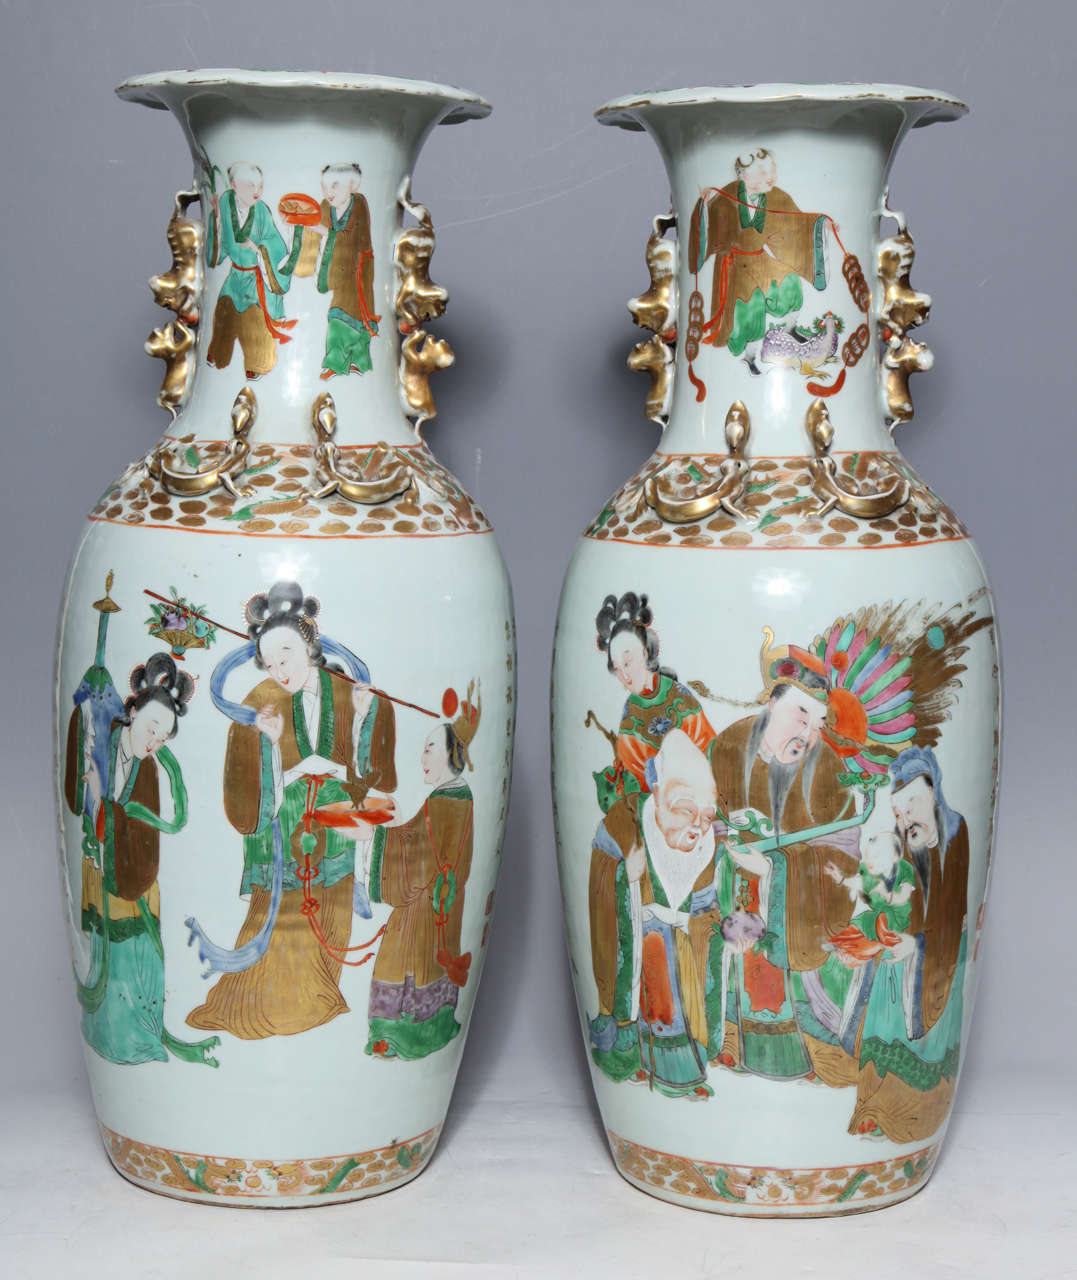 Pair of Chinese porcelain vases with painted figures and Chinese poems in gold. The gilt poem frames the two groups of figures who likely serve as a narrative complement to the calligraphy. These exquisitely detailed figures encircle the vase their